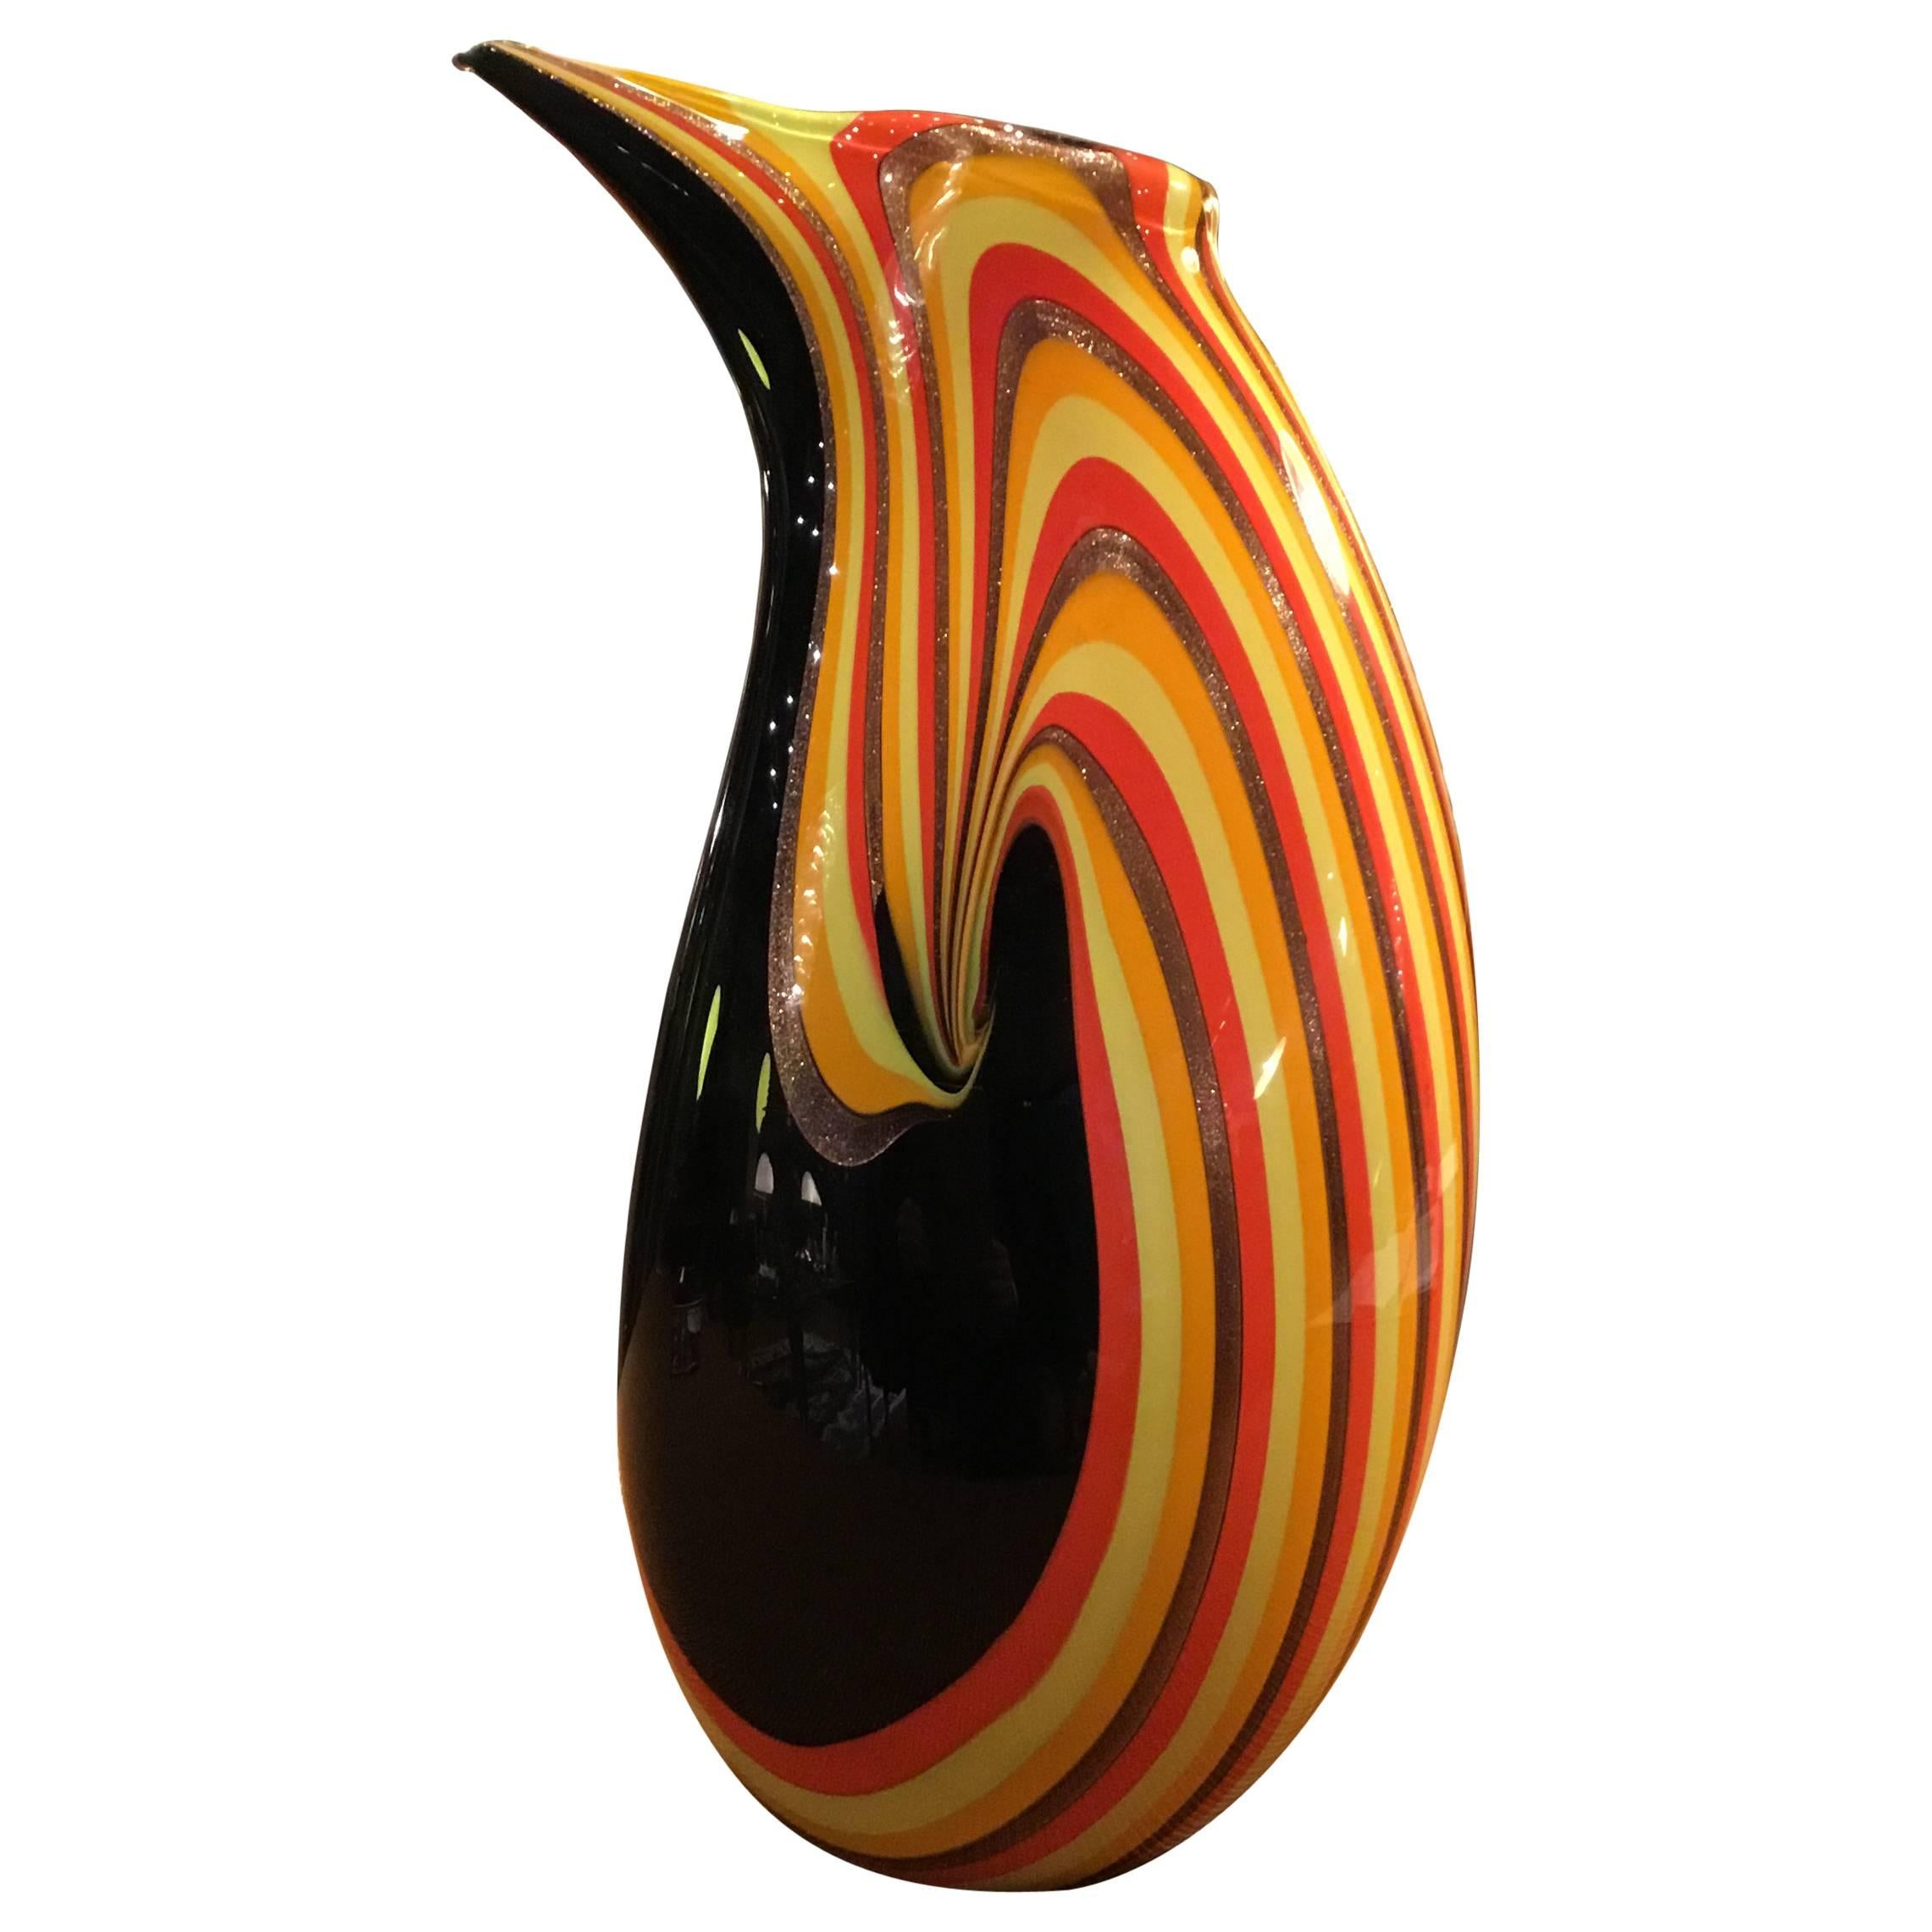 Blown Glass Vase by Paolo Crepax, Venice, Italy